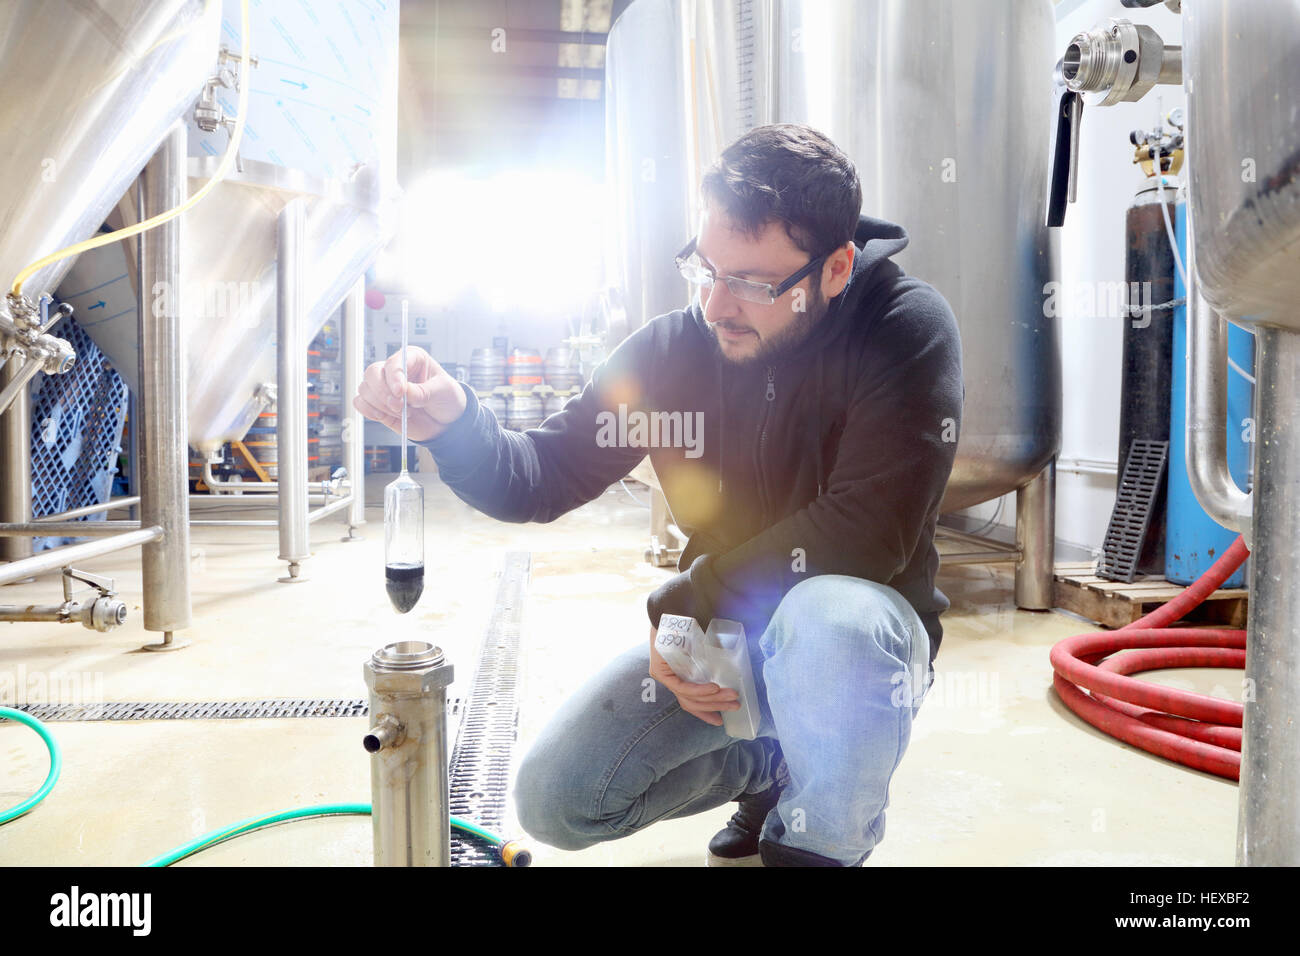 Worker in brewery, checking alcohol and sugar content of product Stock Photo